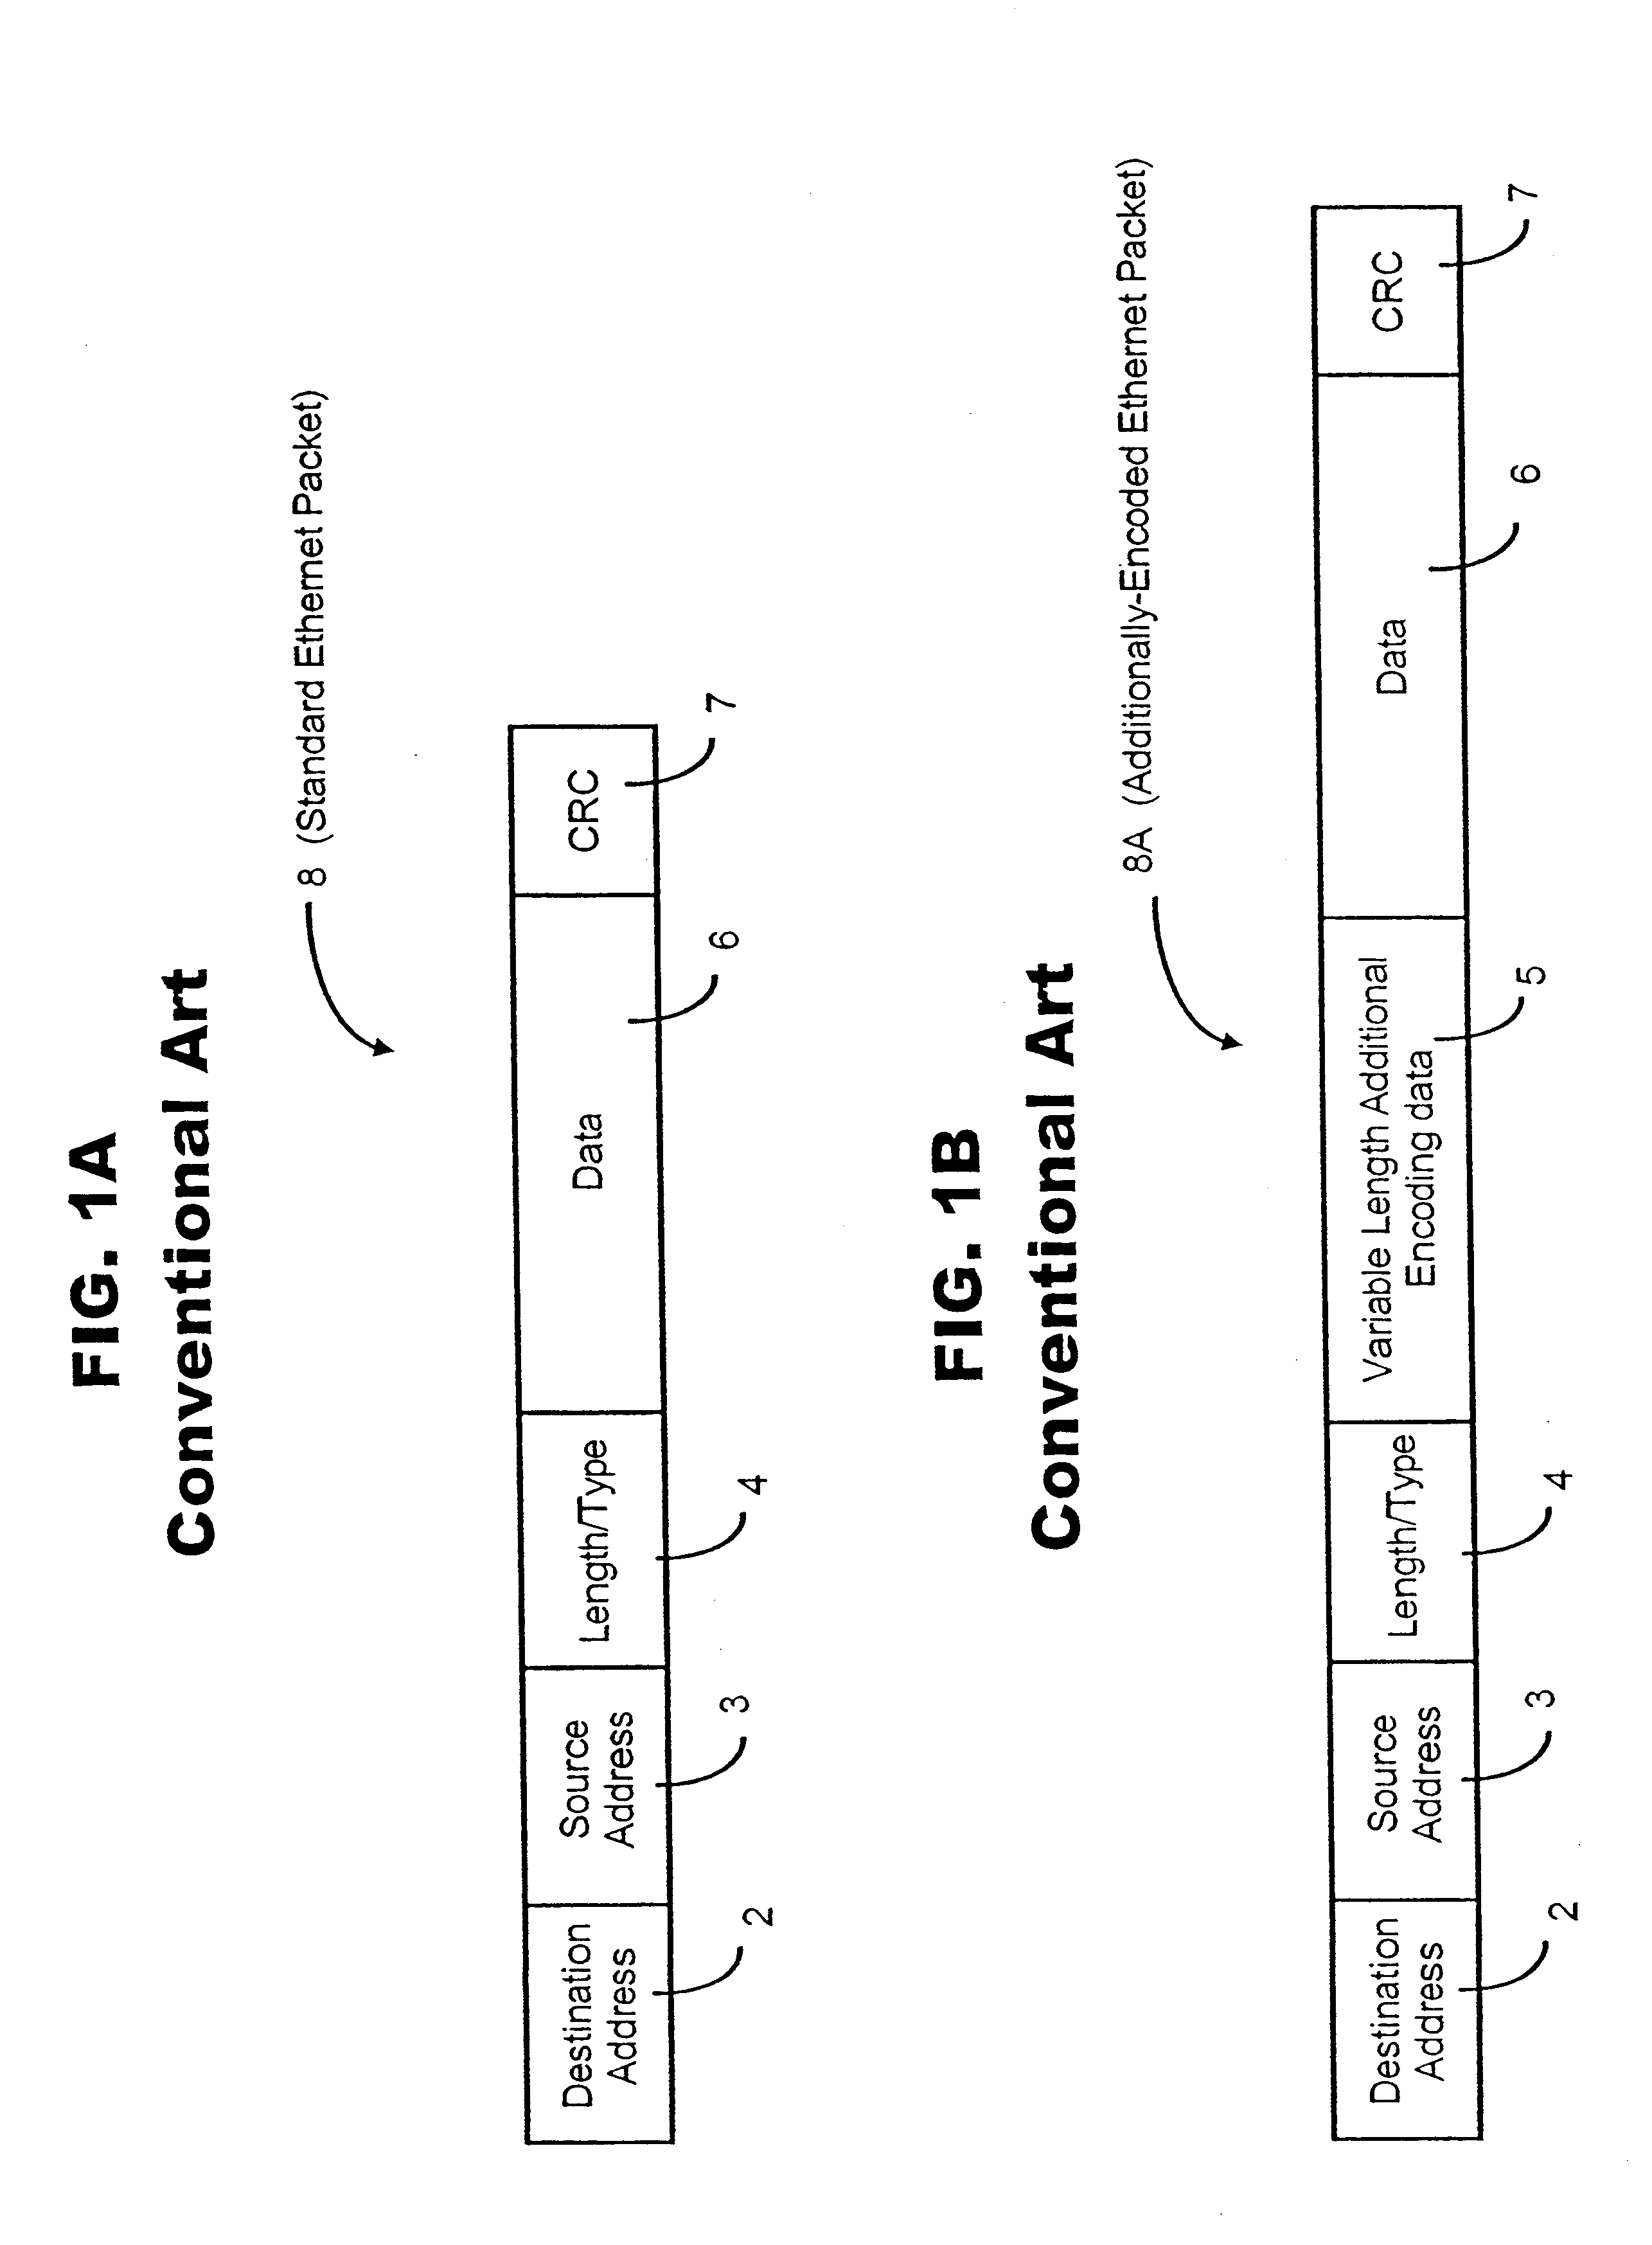 System and method for processing wake-up signals in a network